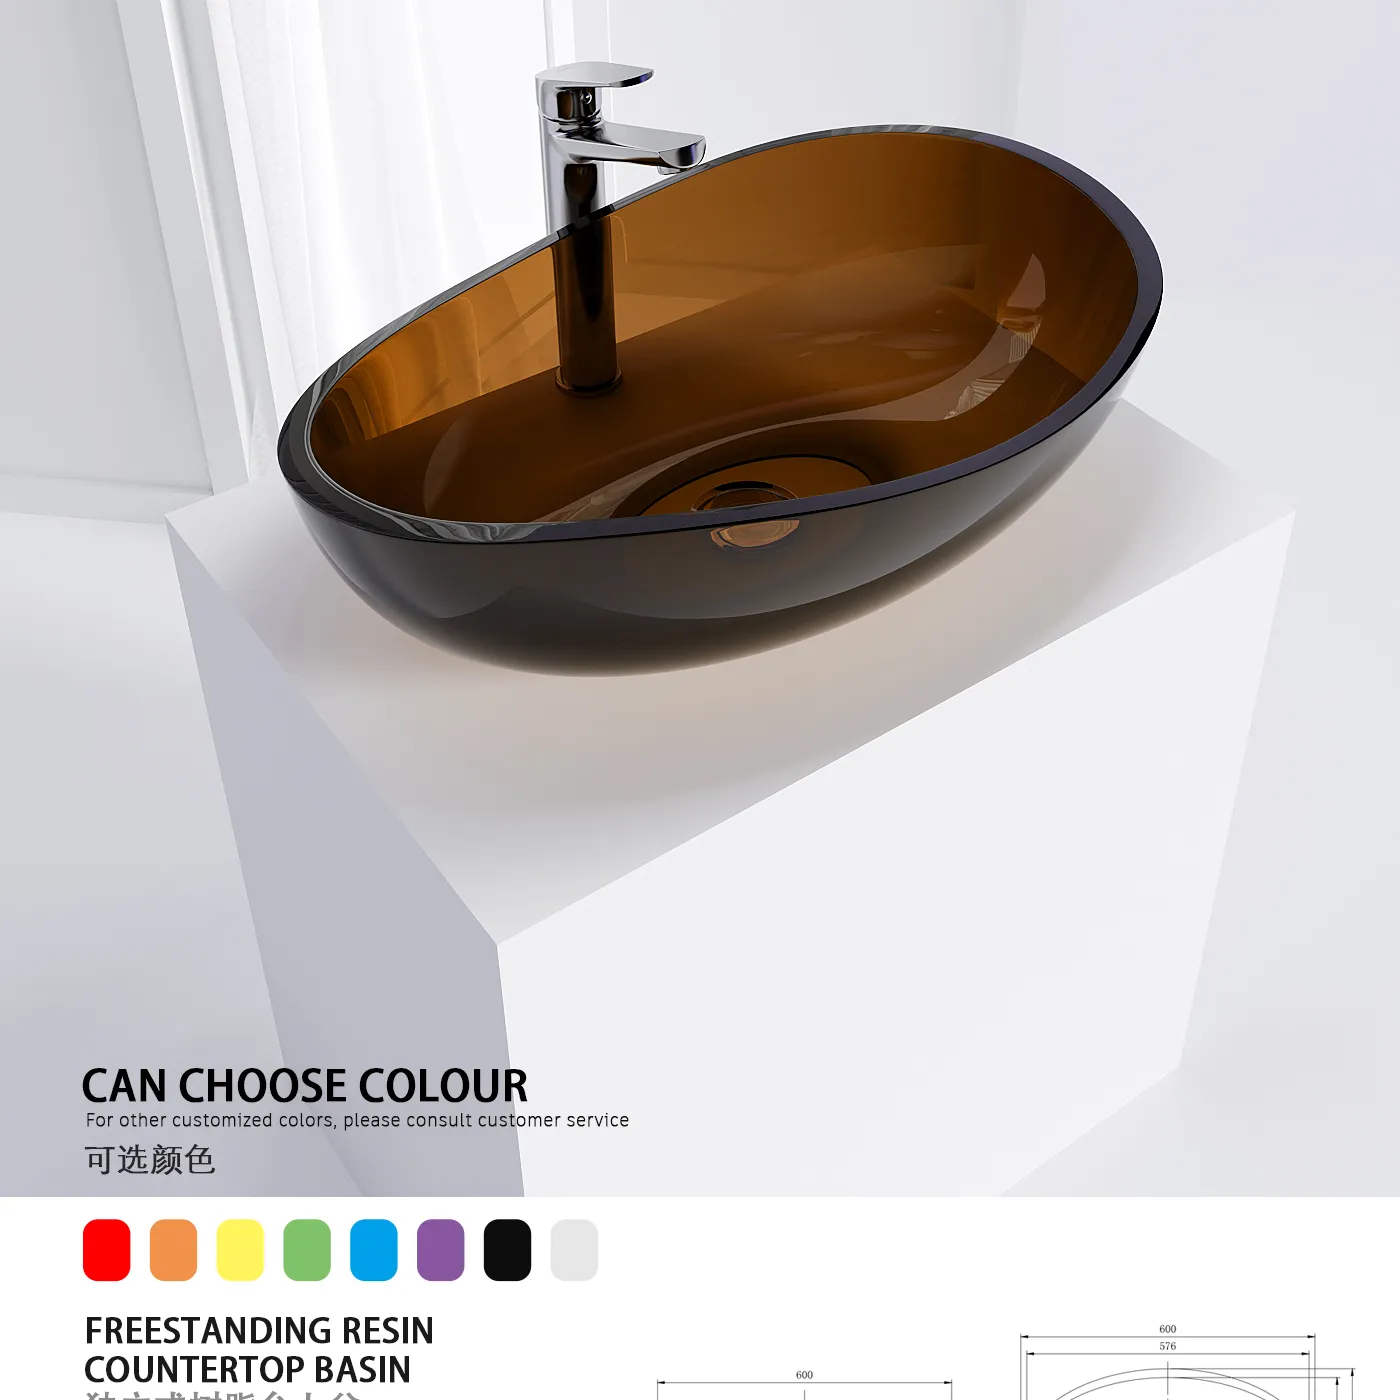 Transparent resin Solid surface made white and elegant counter top basin bathroom wash hand sink artificial stone made